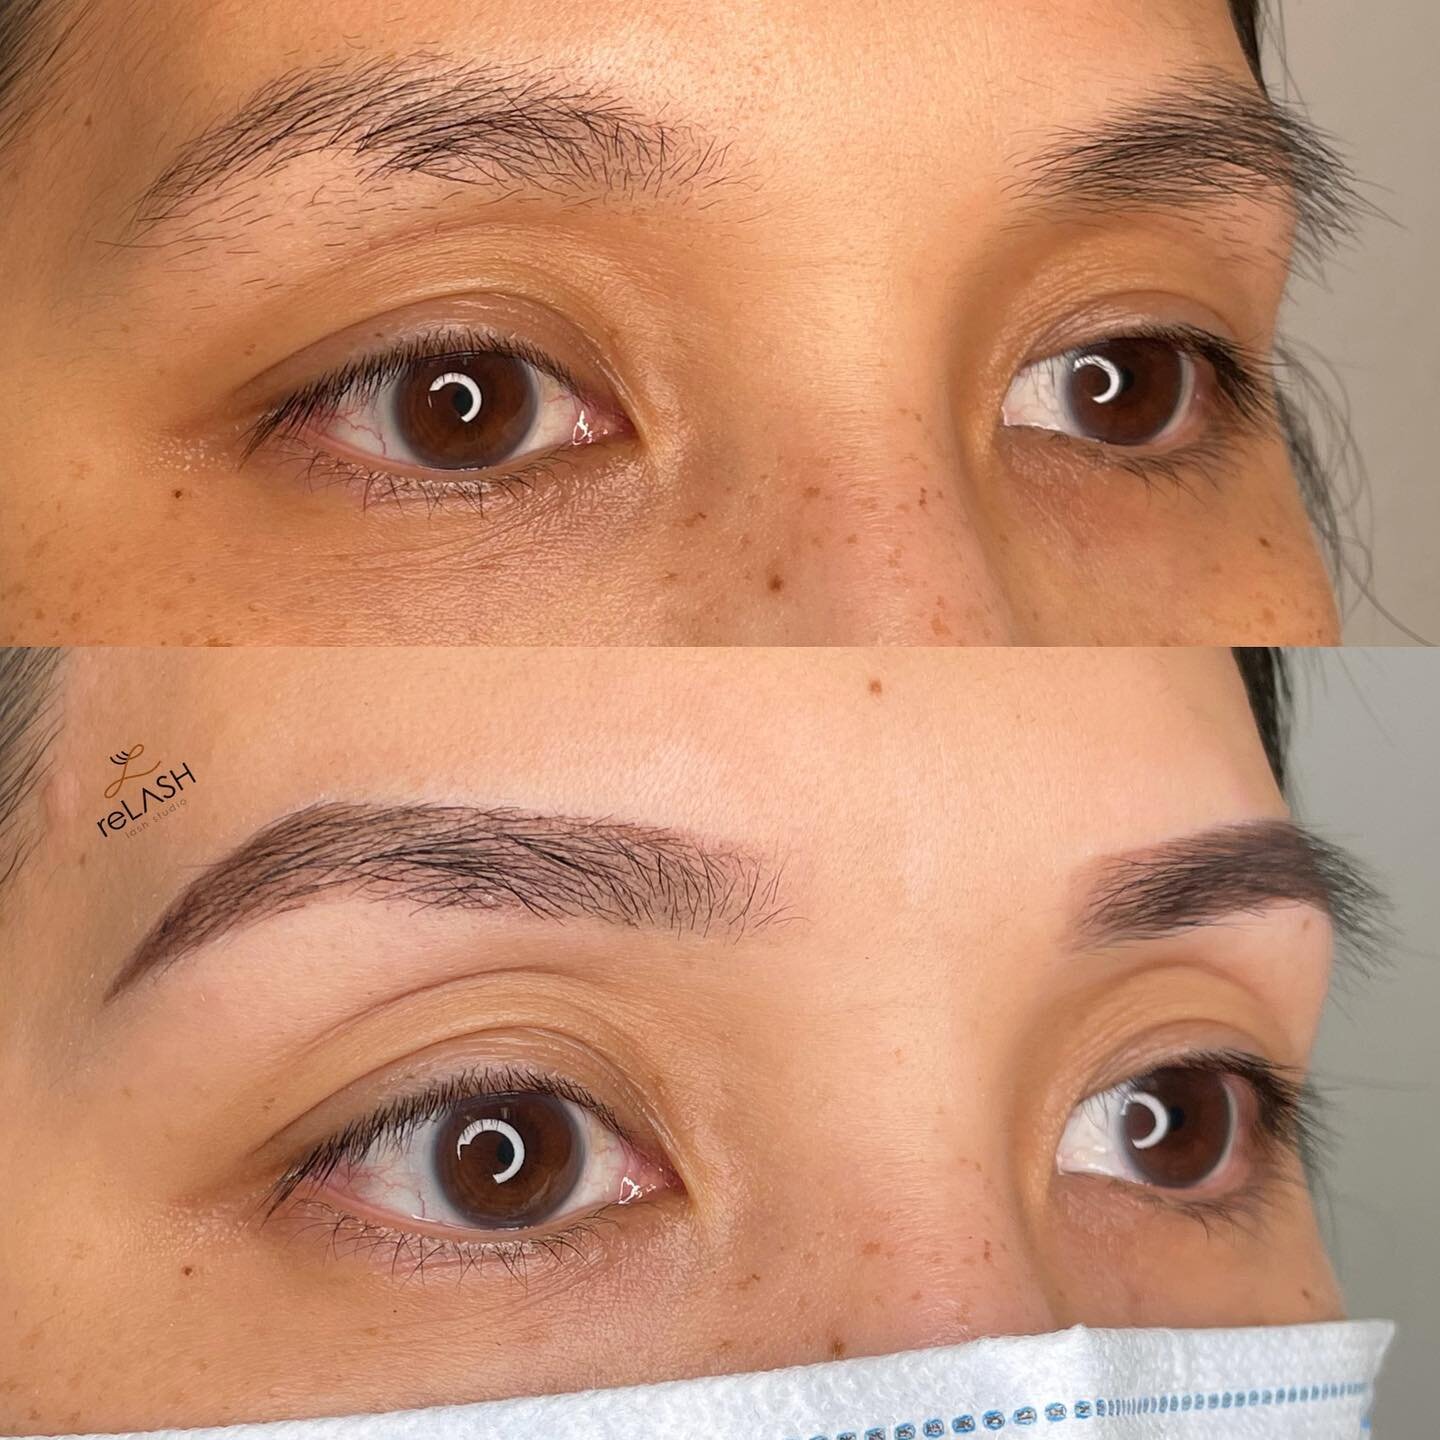 Brow Henna + Brow Shape + Lip wax + Forehead Wax ✨

To create these beautiful brows I used Permanent Lash &amp; Brow #2 + #3 and @gigispa lavender wax.

Have you been wanting to try this service and have questions? Feel free to ask in the comments 🙂